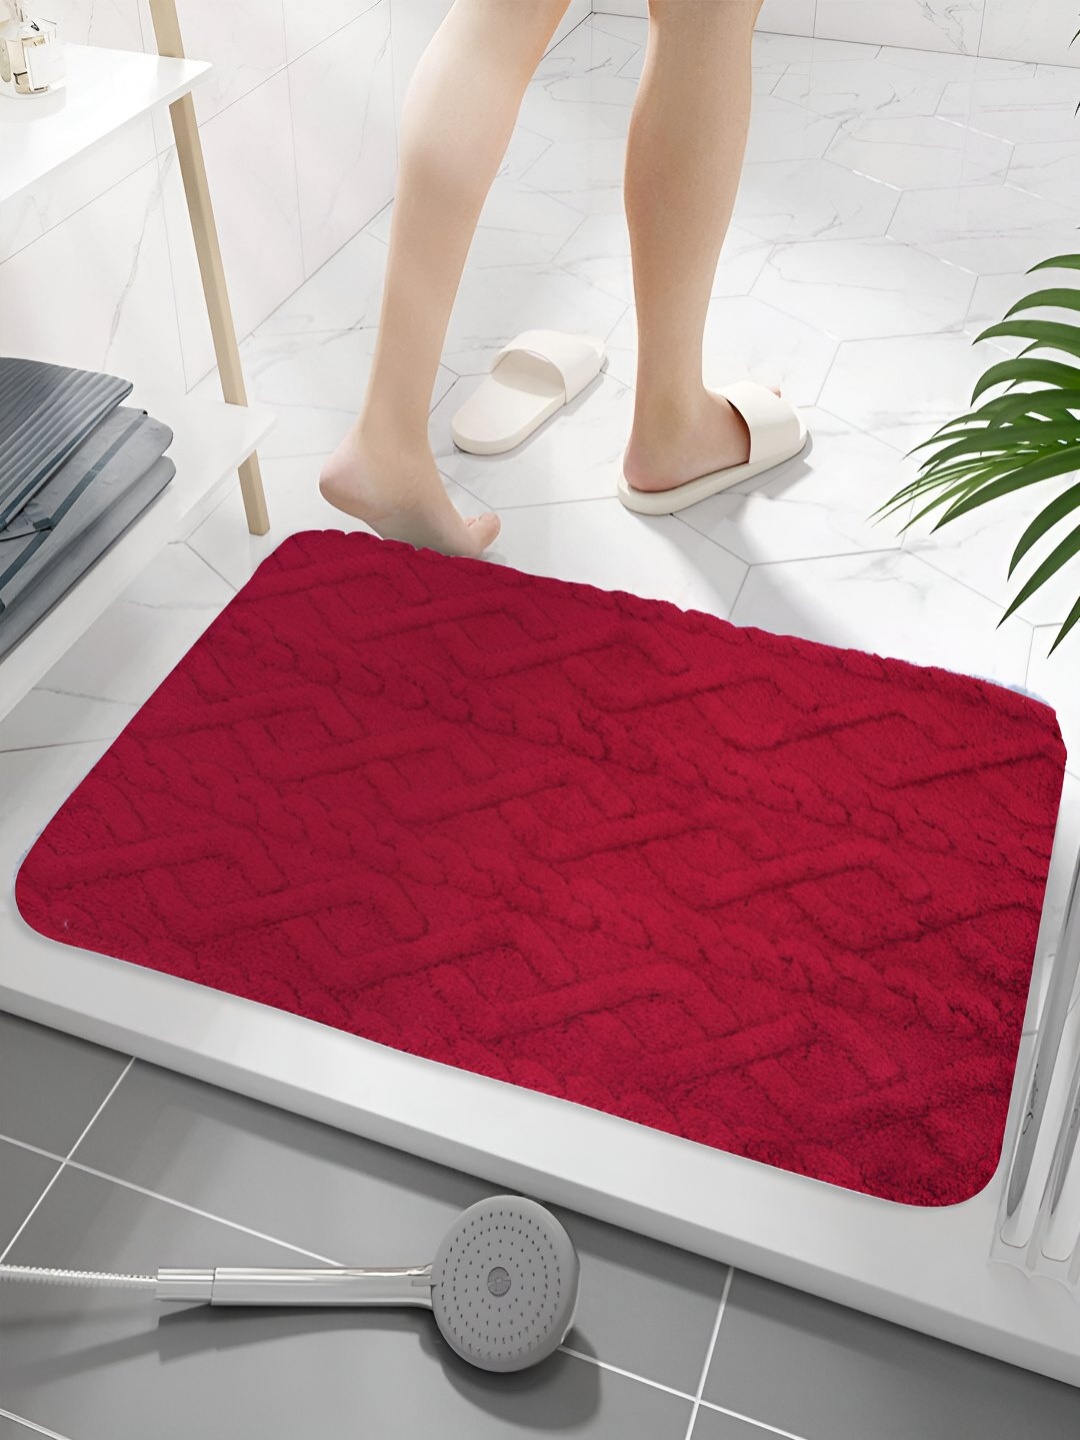 

HOUSE OF QUIRK Red Geometric Textured Microfiber Anti-Skid Rectangle Floor Mat